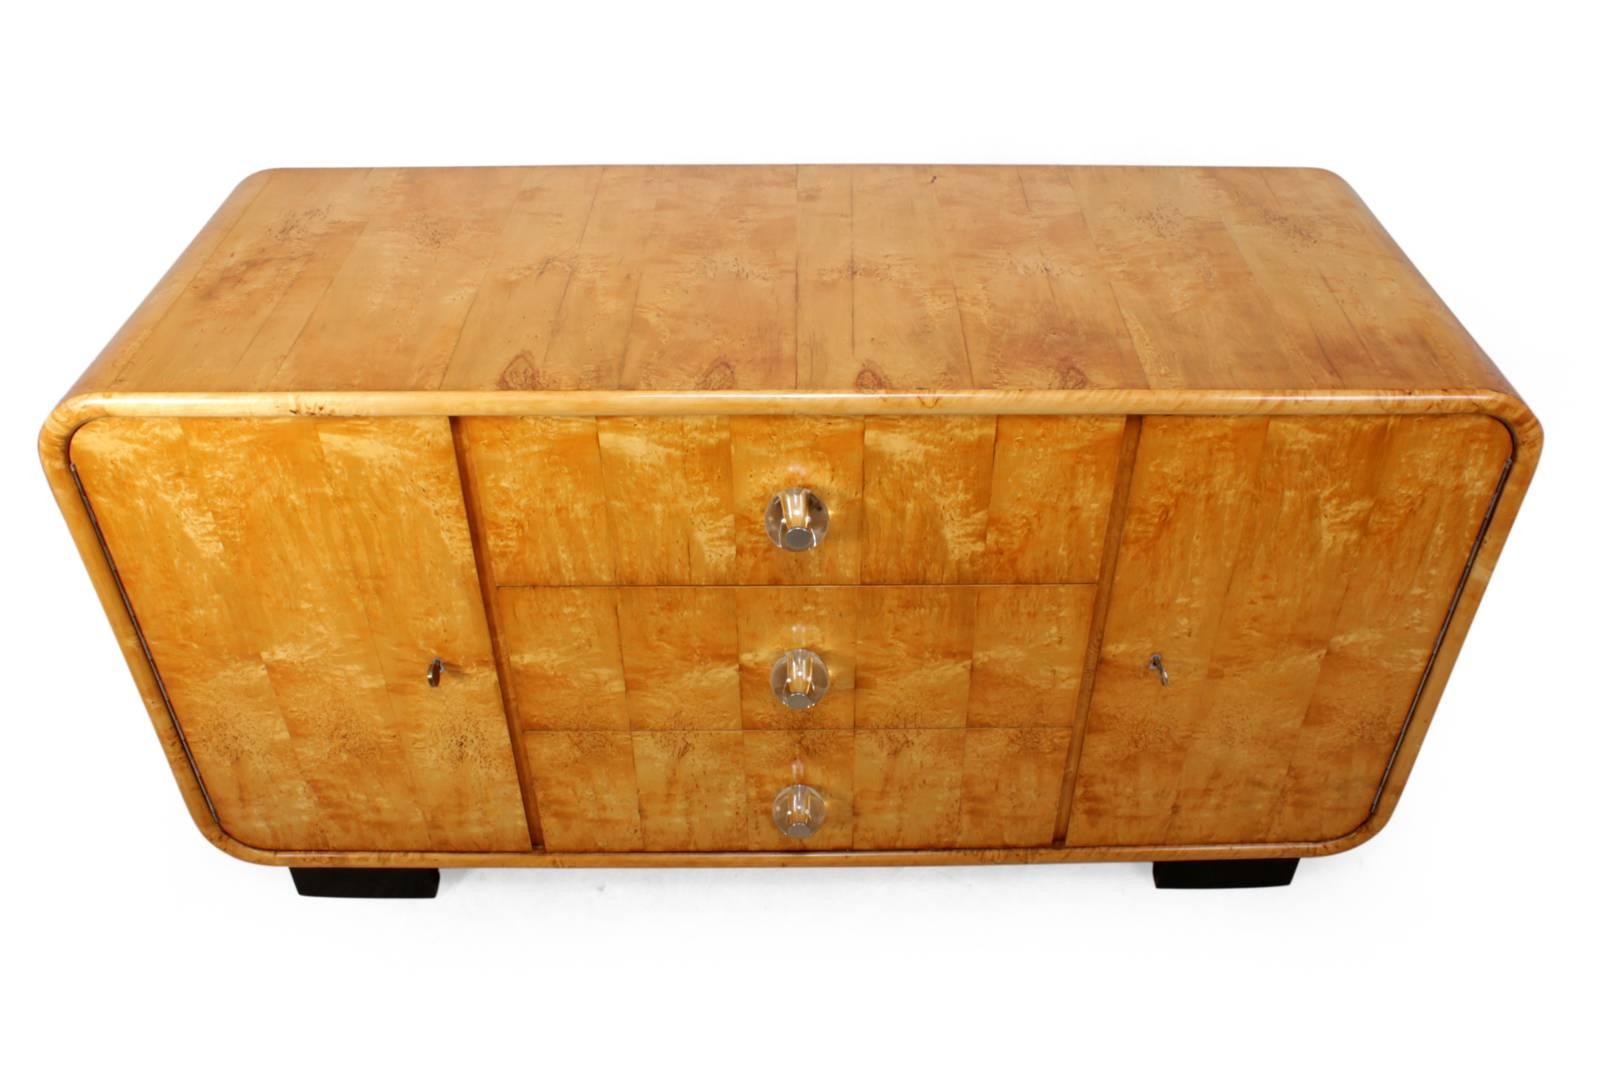 Scandinavian Art Deco sideboard
This art deco revival sideboard produced in the 1950s veneered in karelian birch it has two doors with adjustable shelved behind, it has three central drawers with glass handles.

Age: 1950

Style: Art